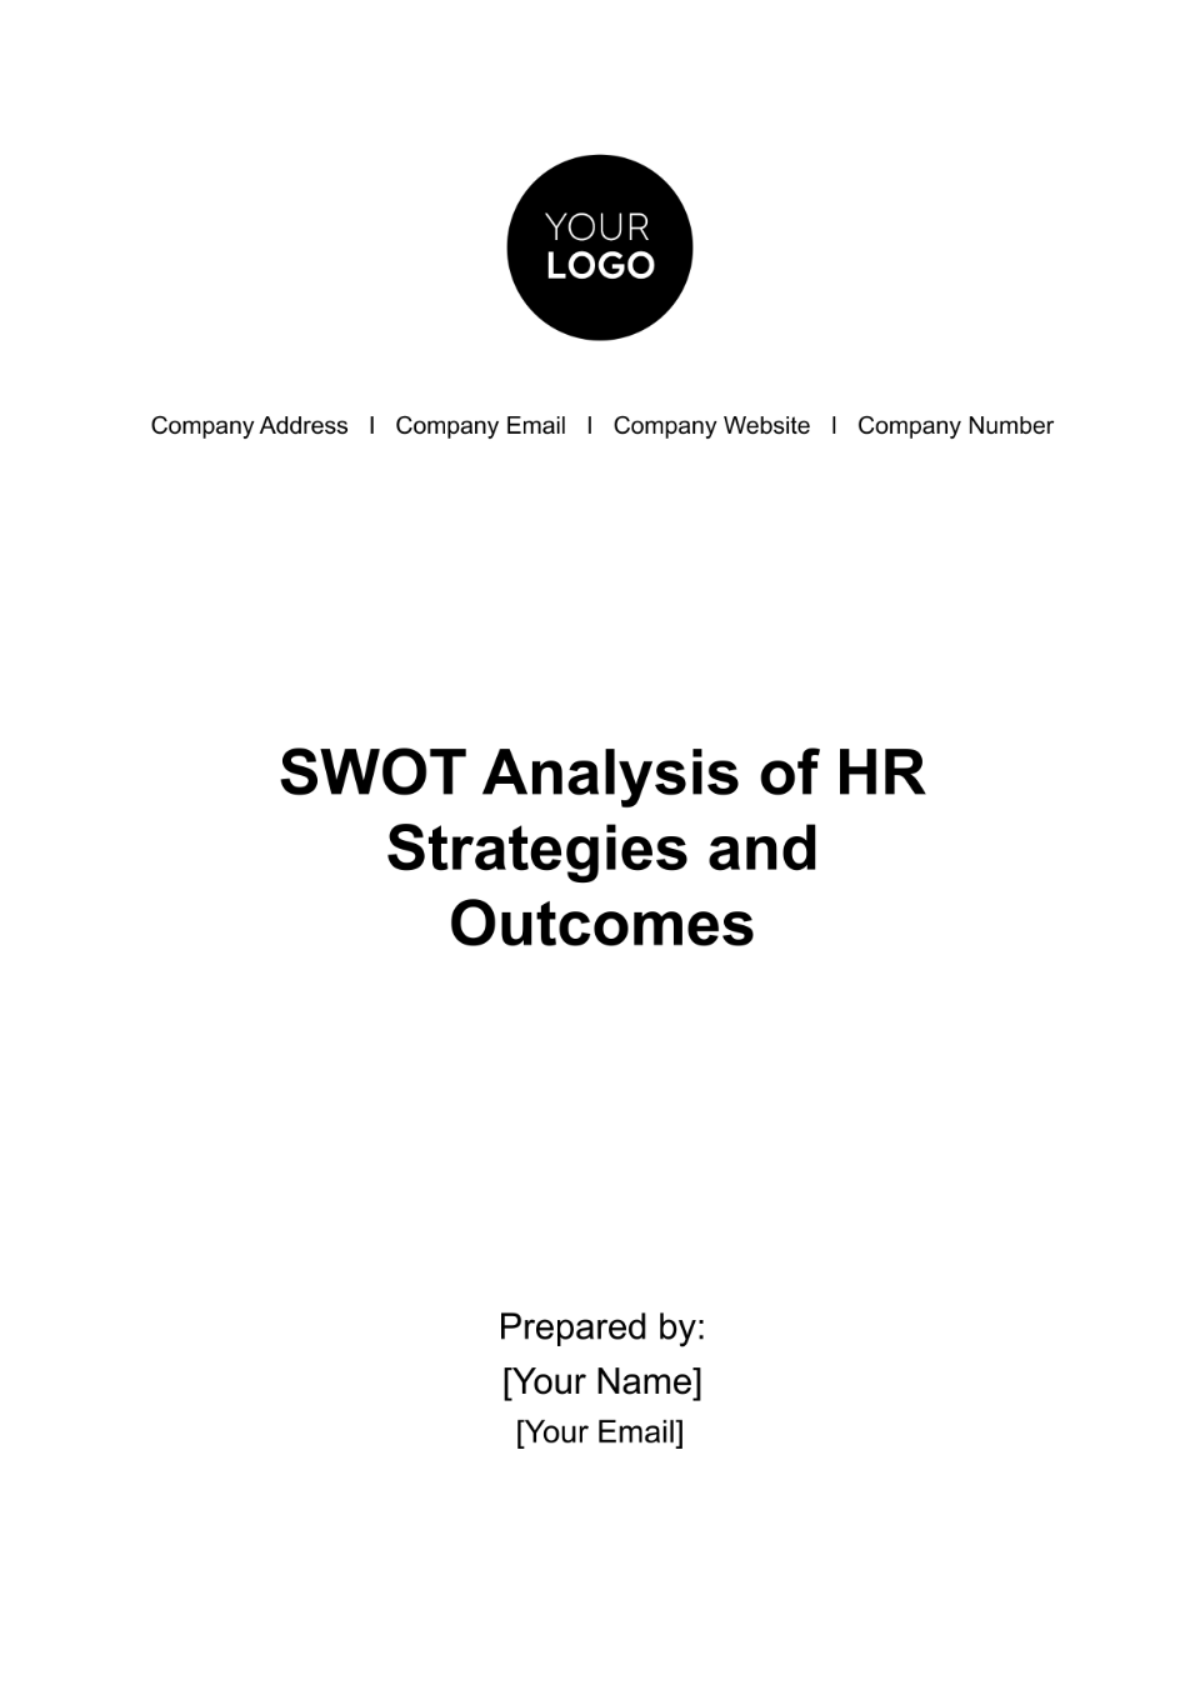 Free SWOT Analysis of HR Strategies and Outcomes Template